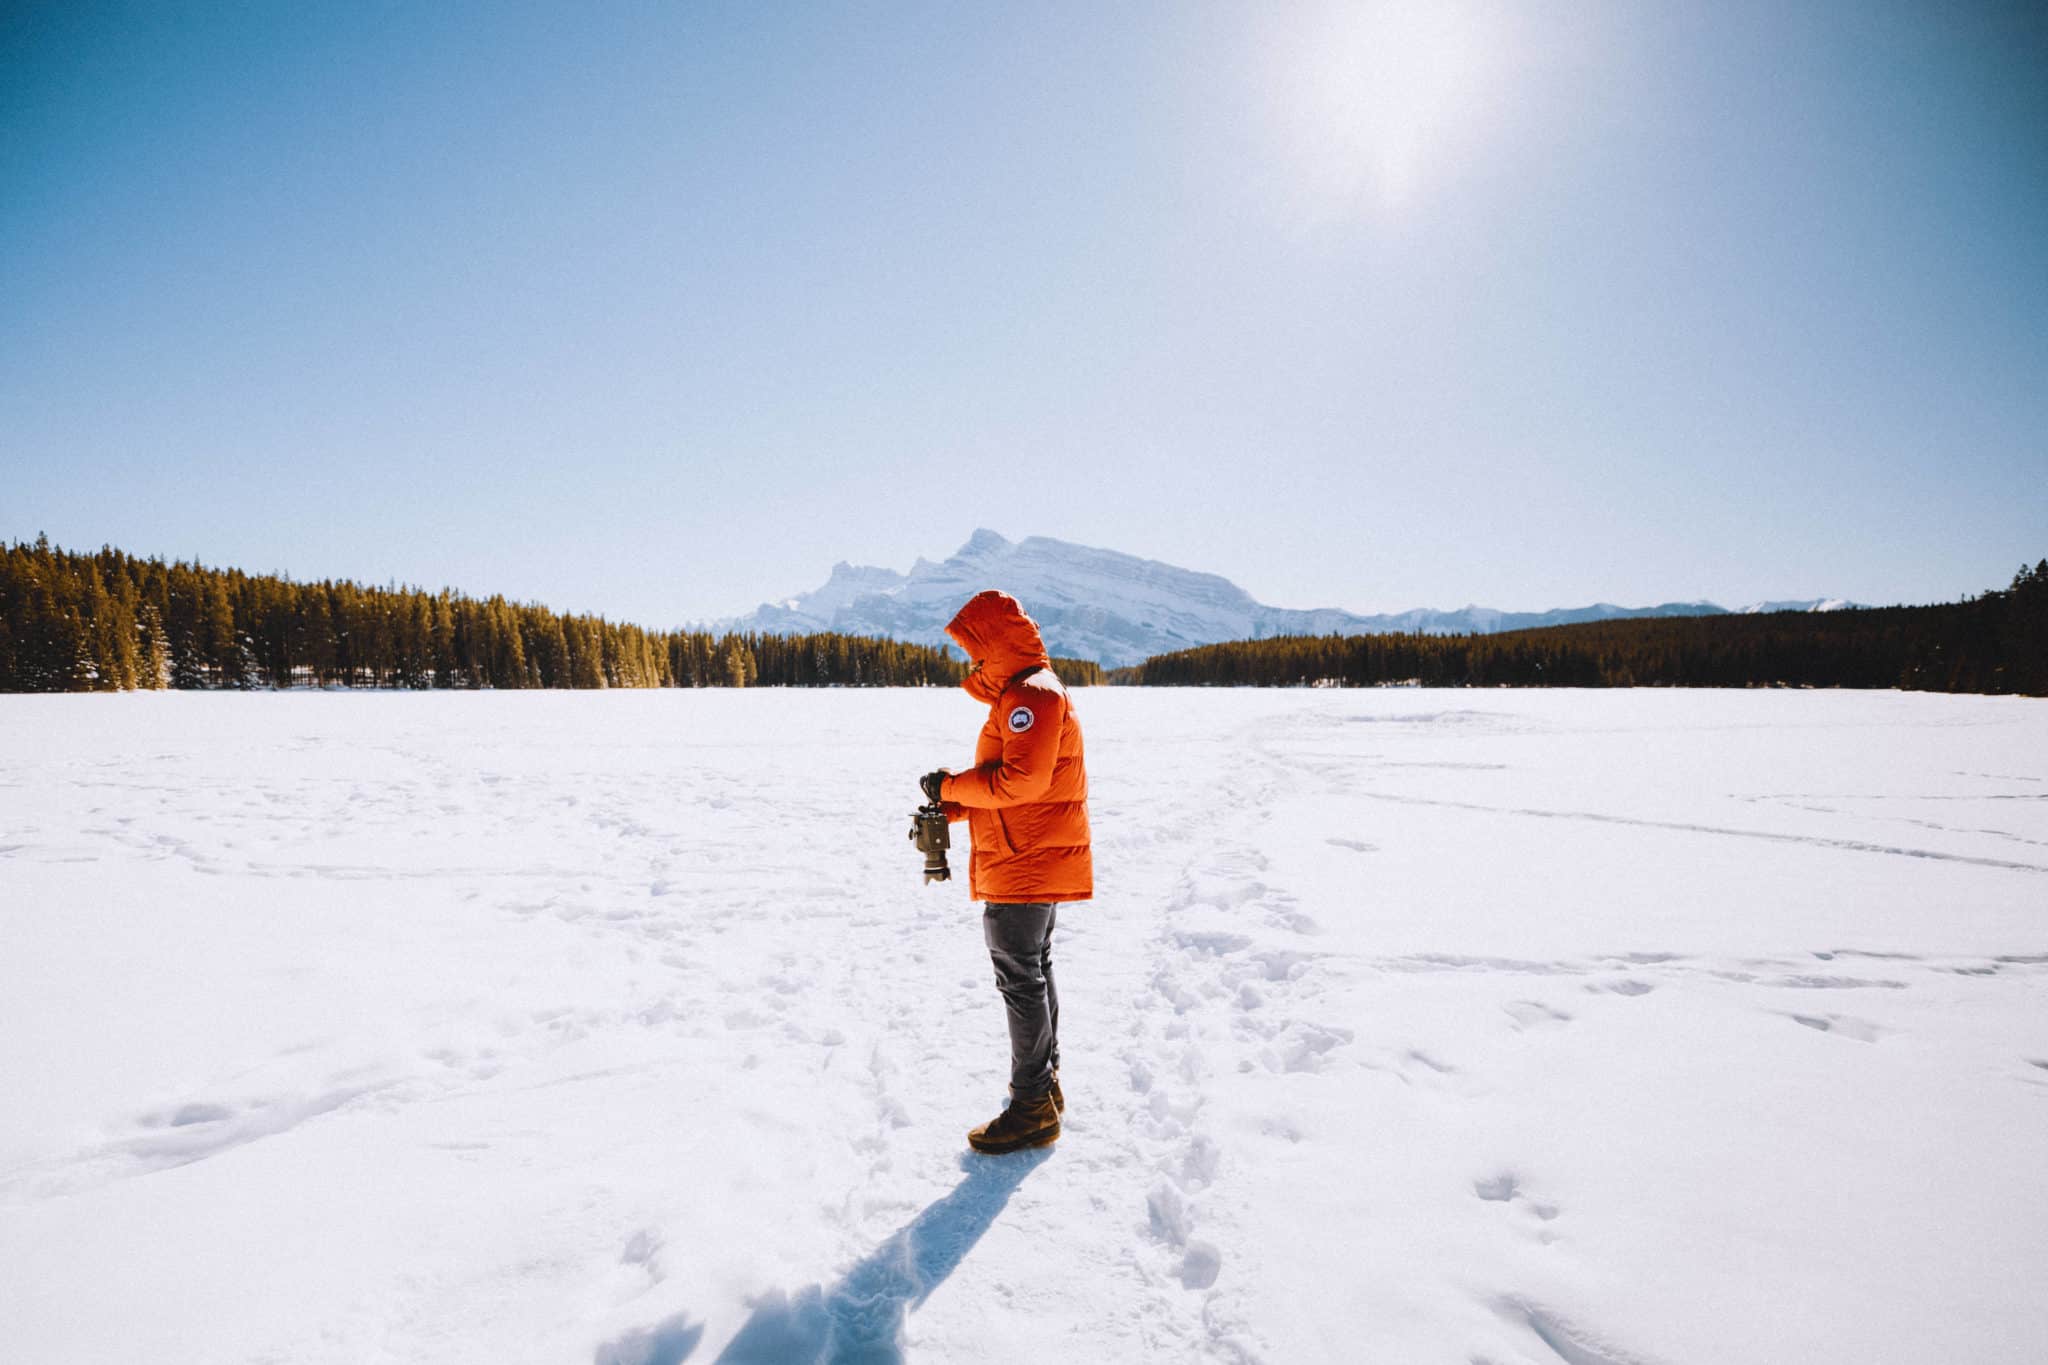 The Complete Banff Winter Packing List To Keep You Cozy On Your Next Epic Canadian Vacation